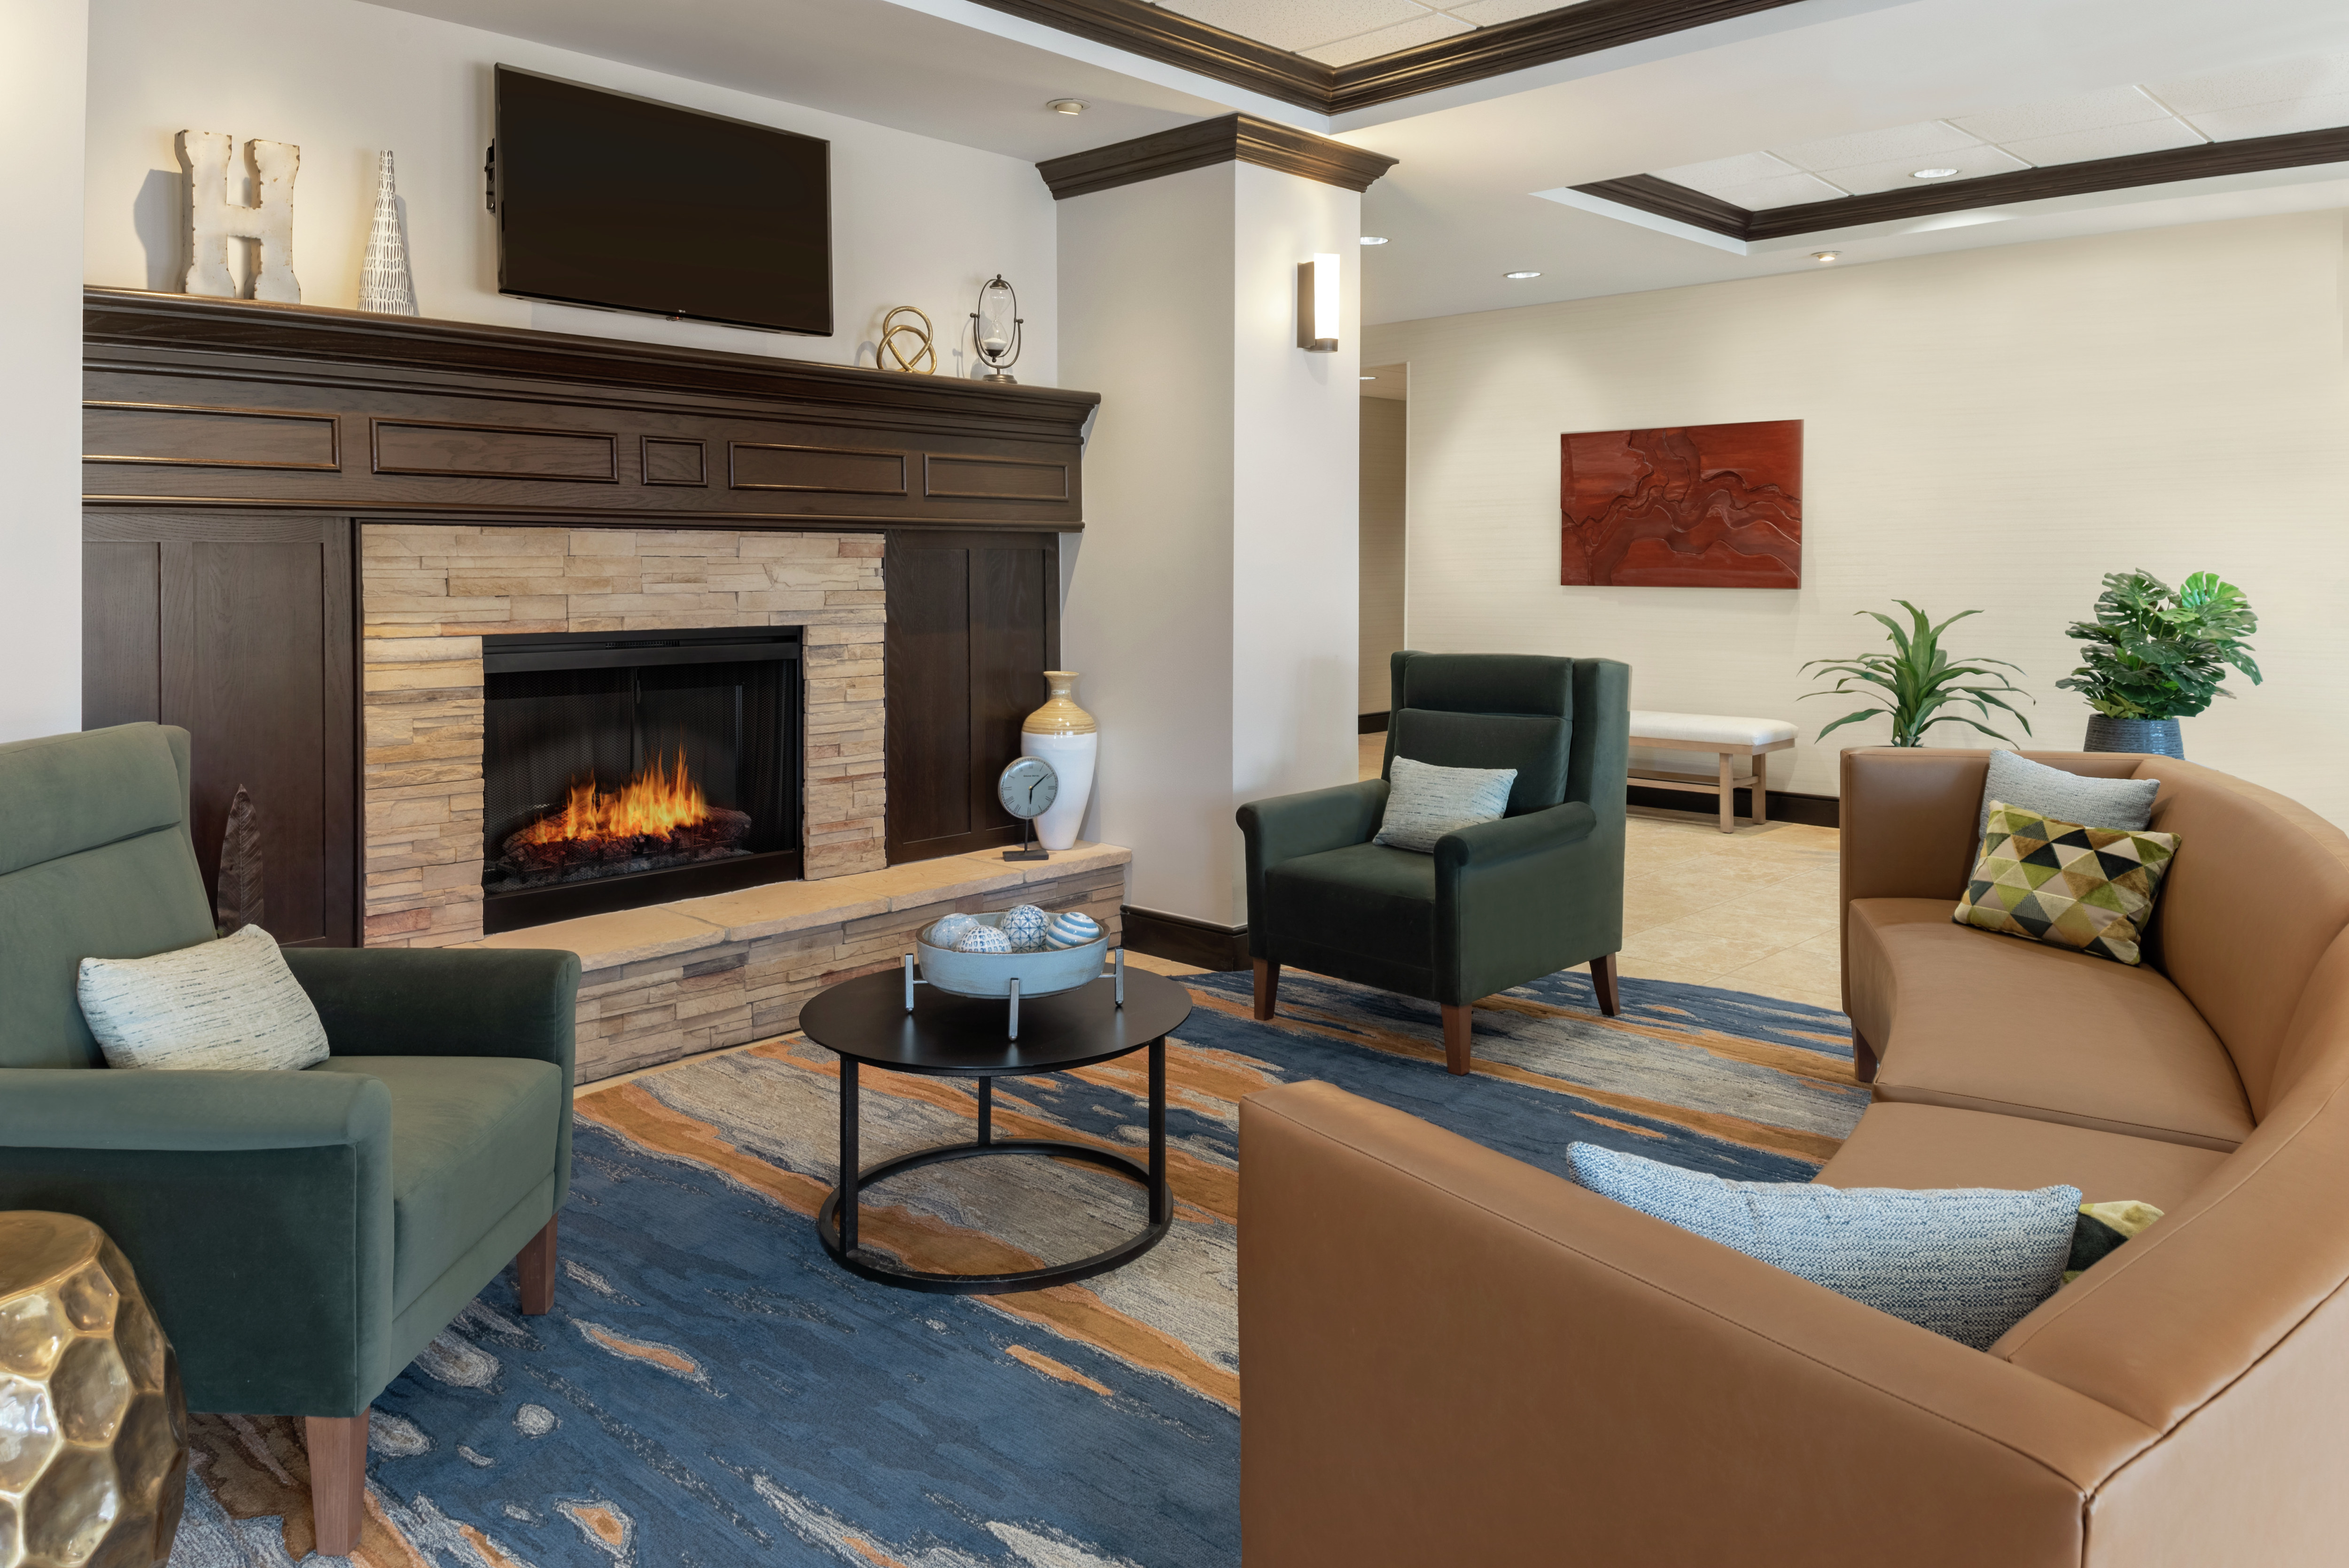 Stylish lodge area for guests to relax featuring beautiful fireplace and comfortable seating.